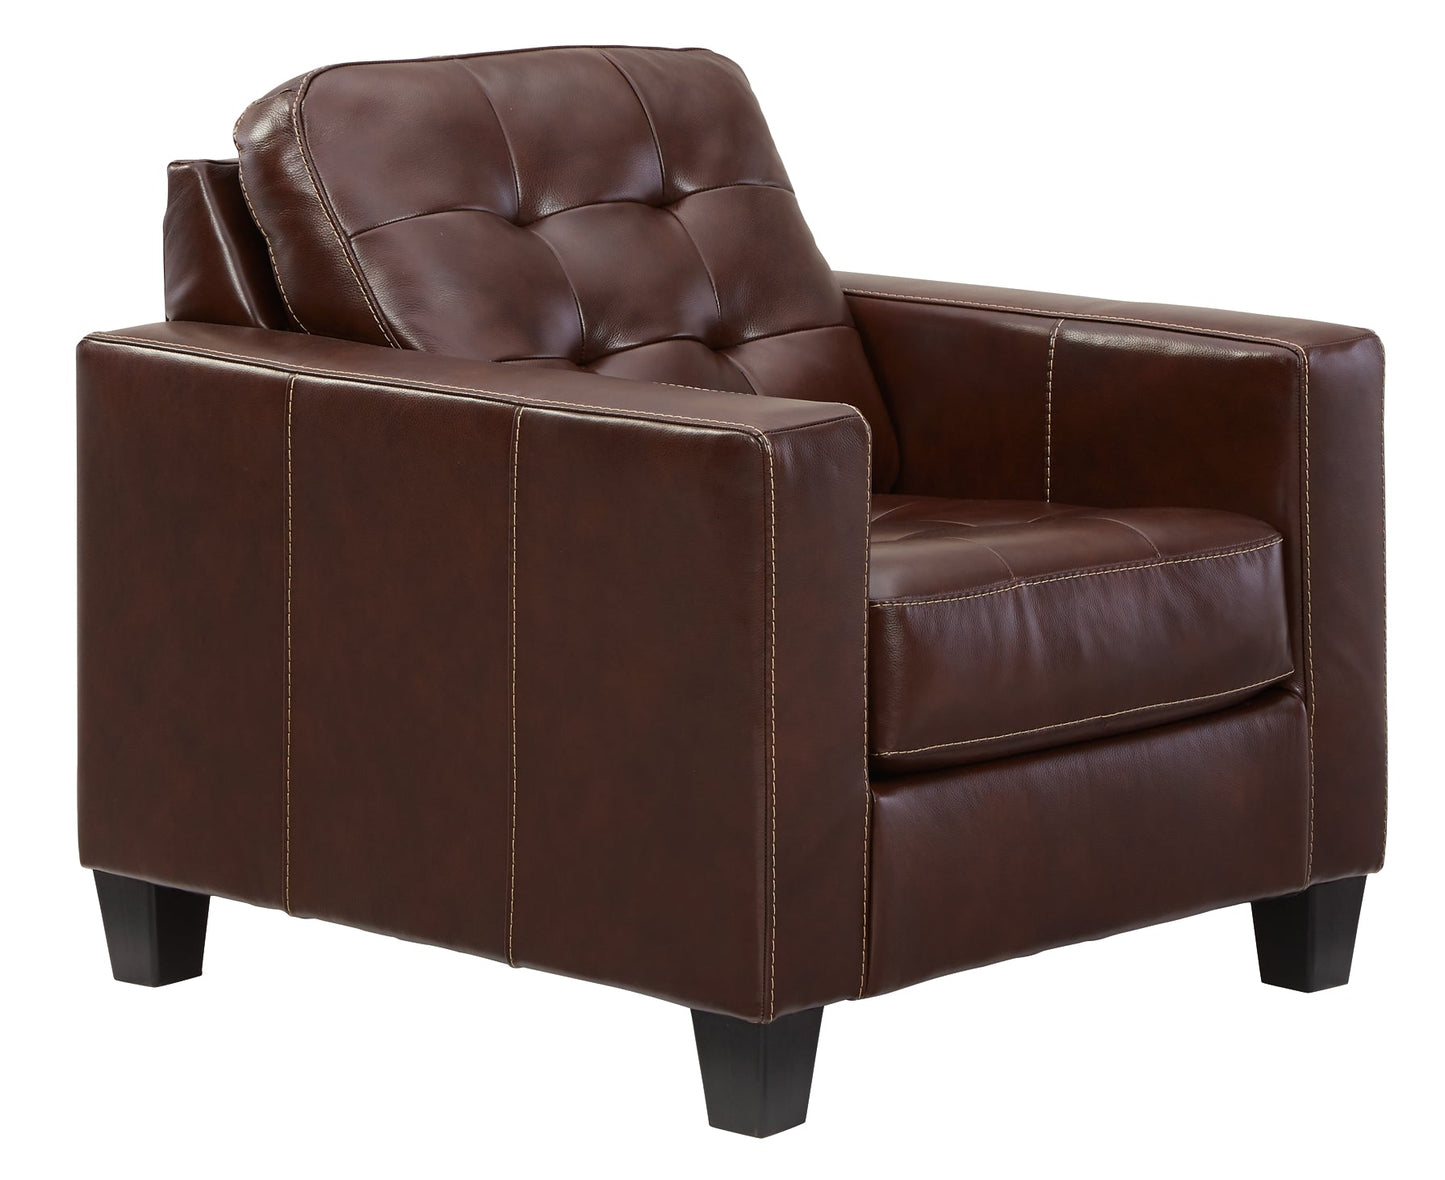 Altonbury Chair and Ottoman Smyrna Furniture Outlet